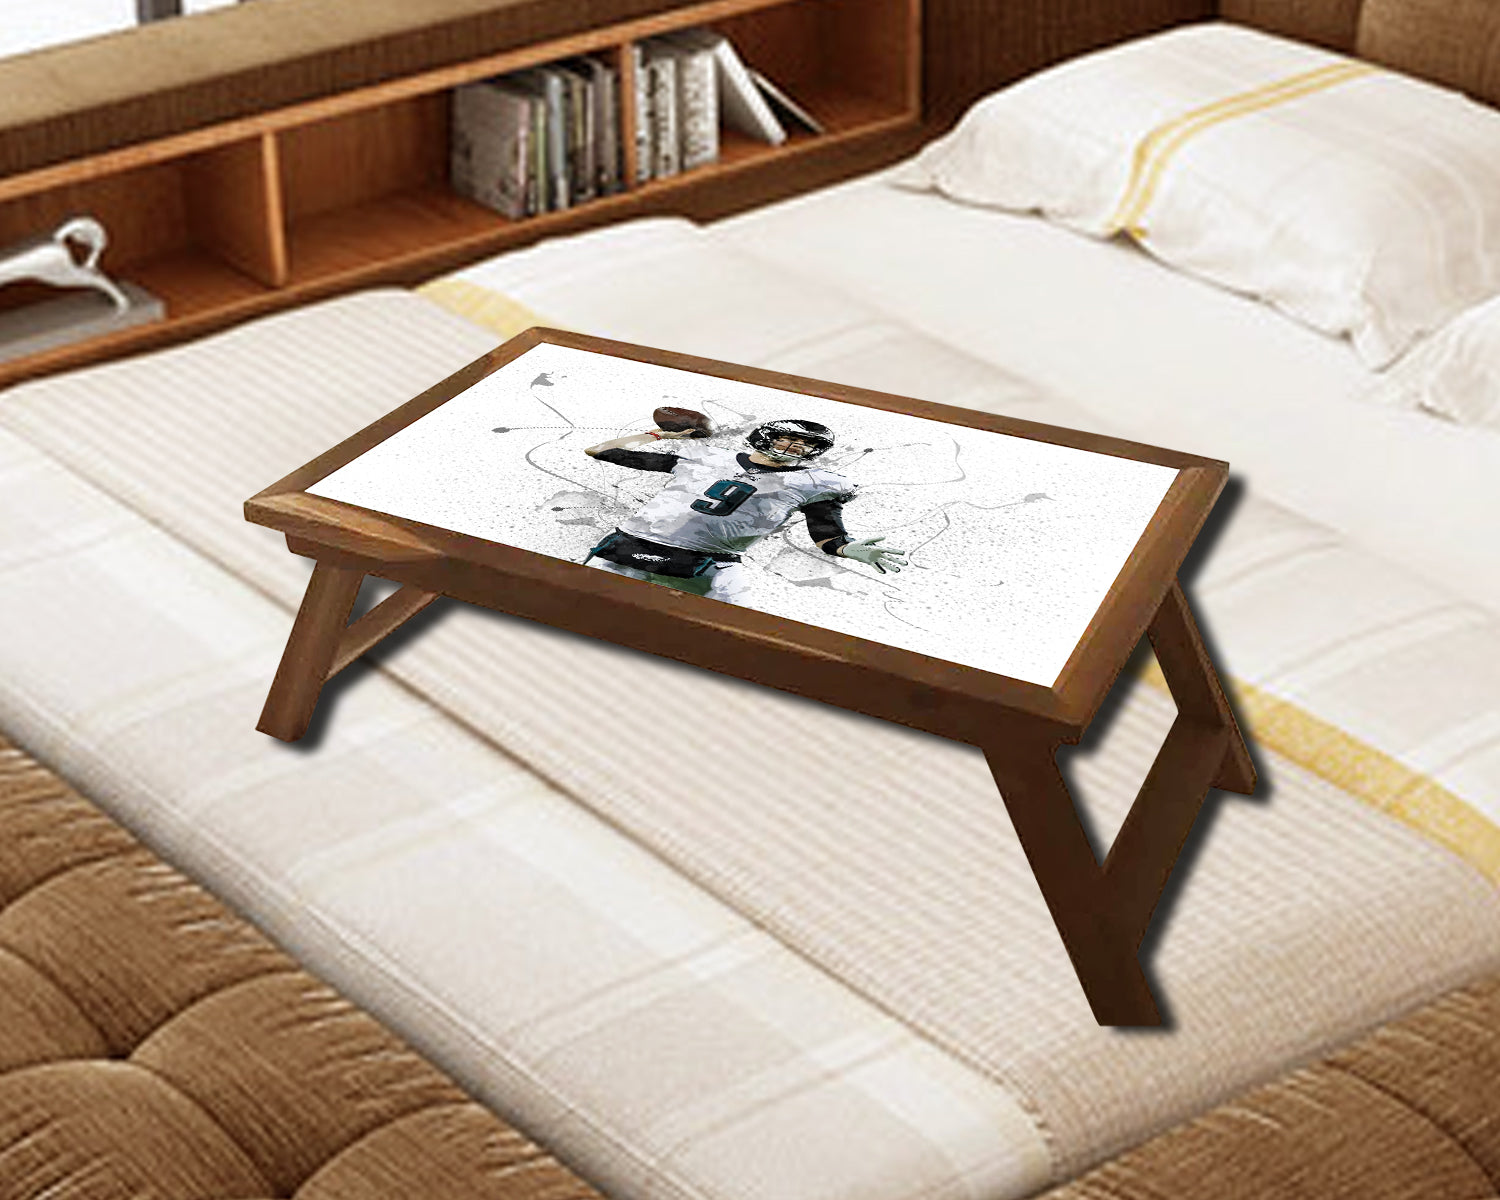 Nick Foles Splash Effect Coffee and Laptop Table 